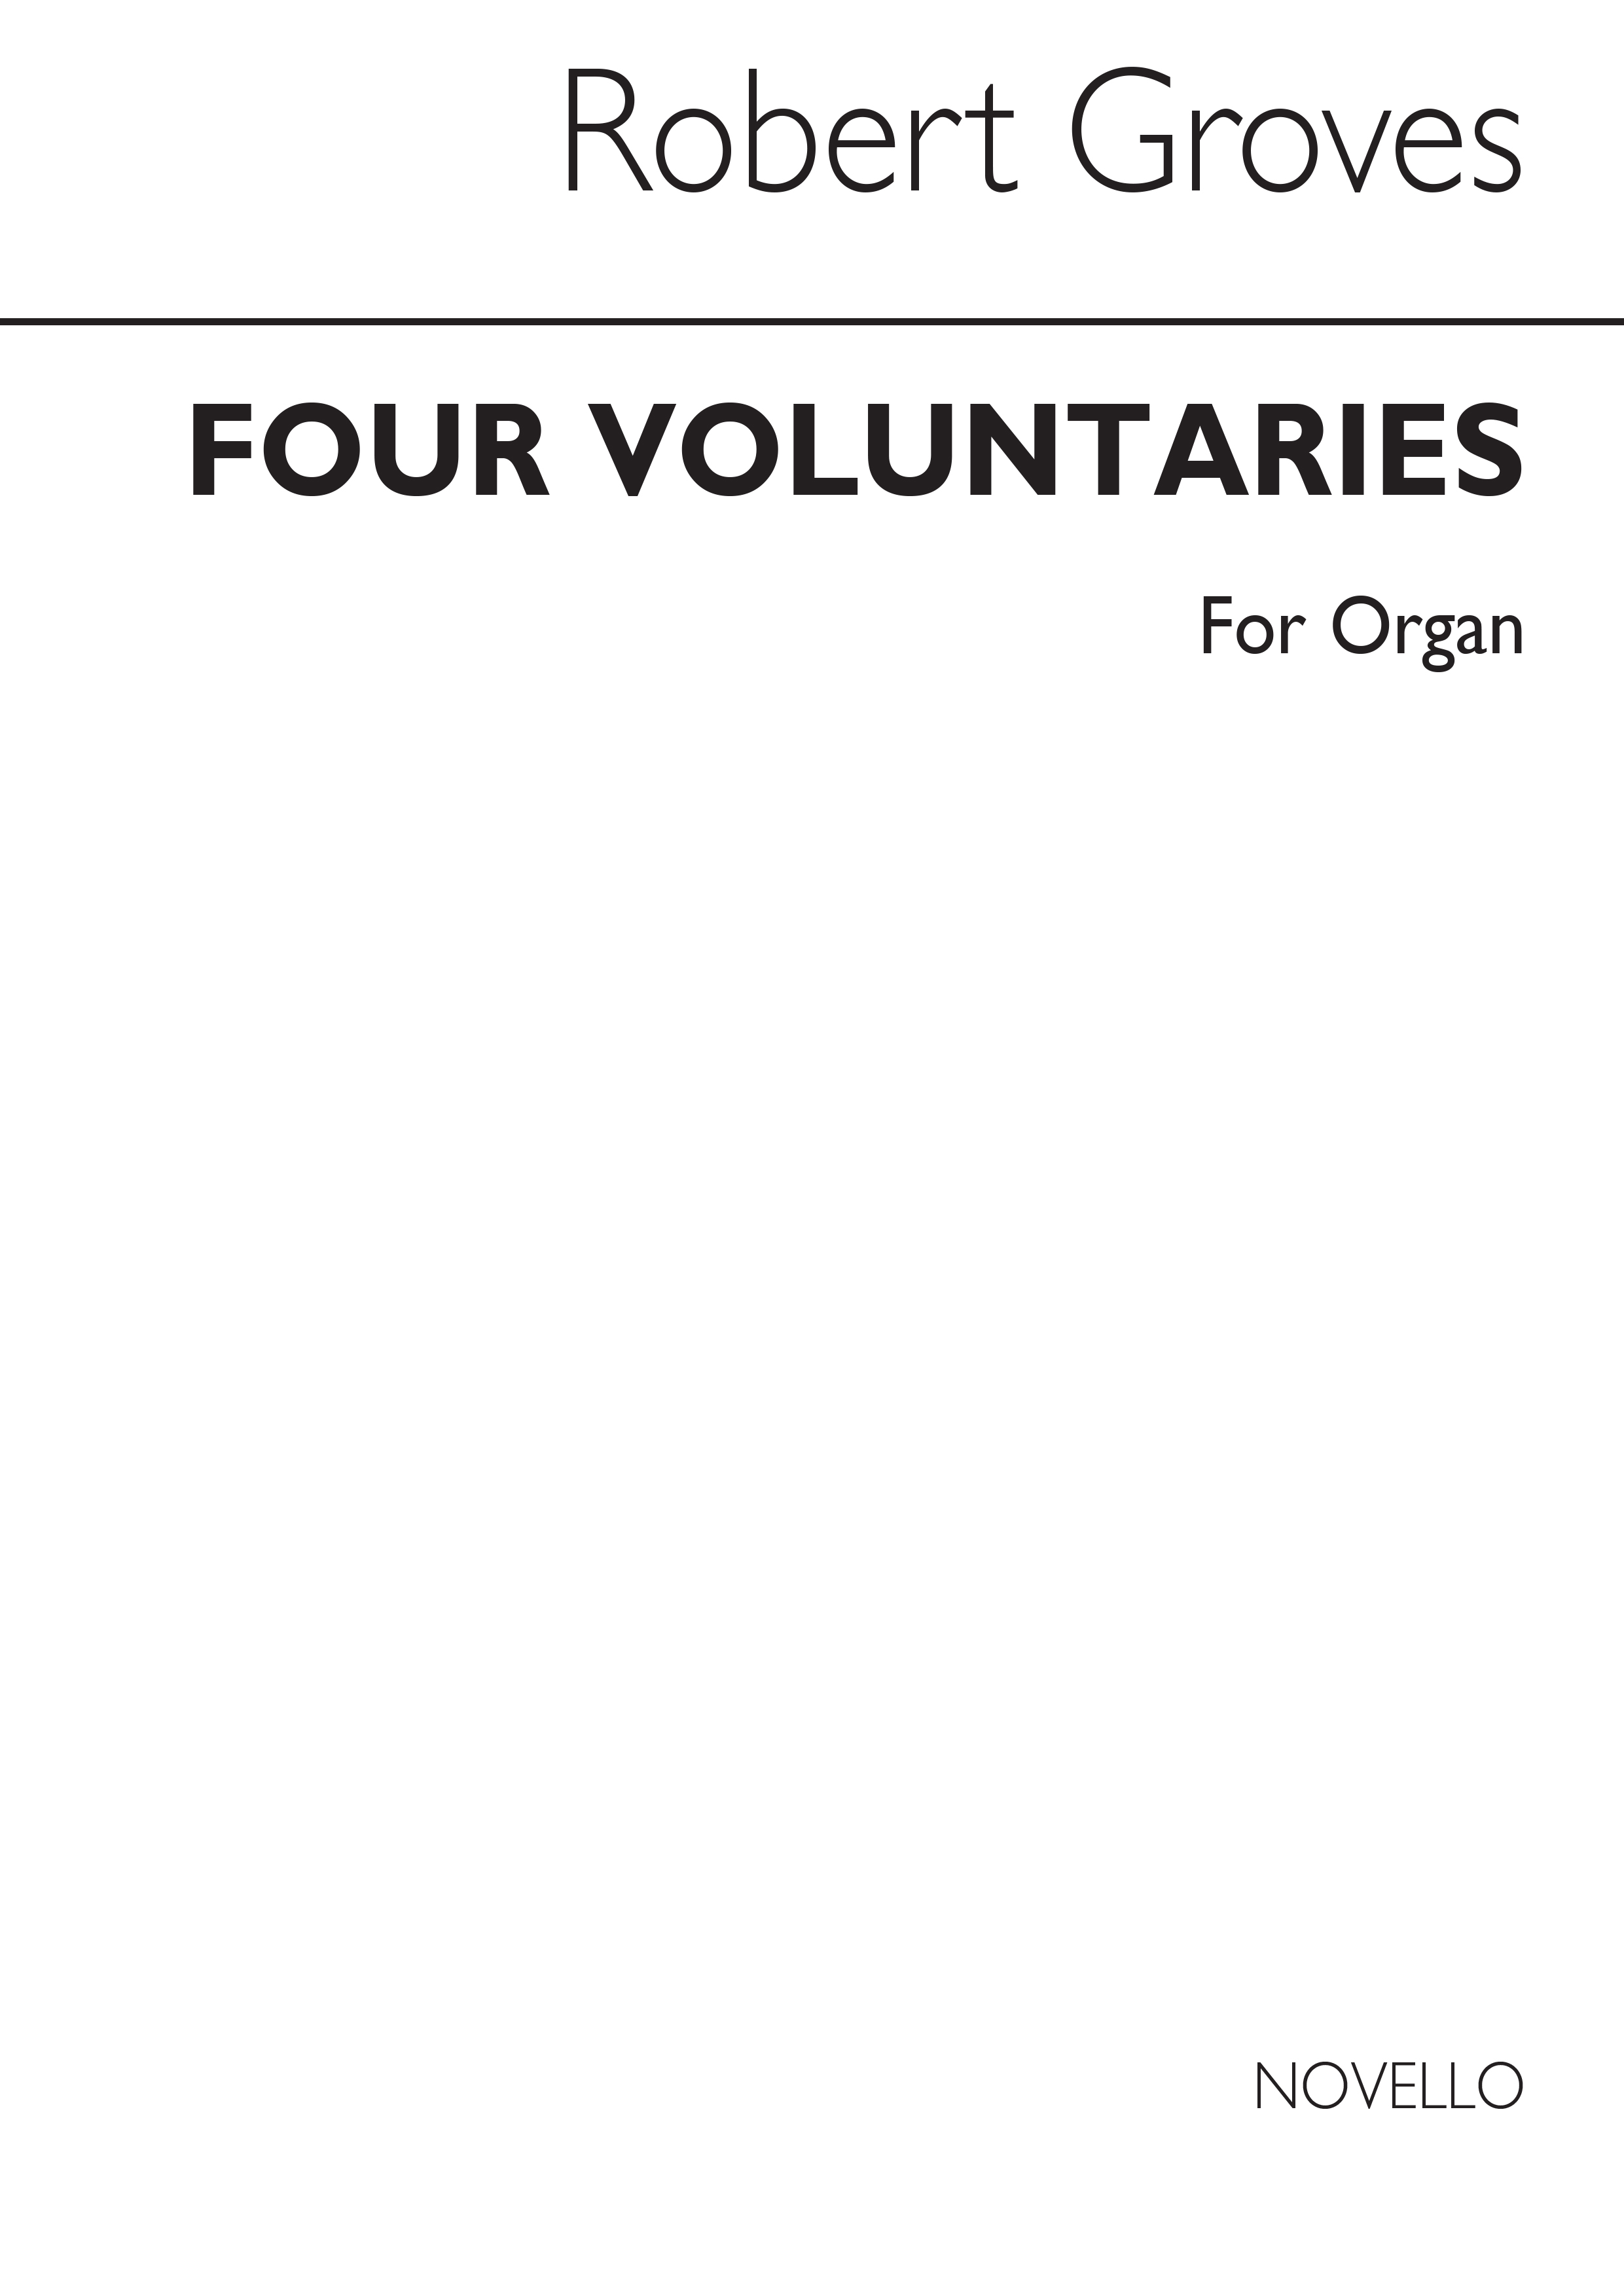 Groves, R Four Voluntaries Organ With Or Without Pedals